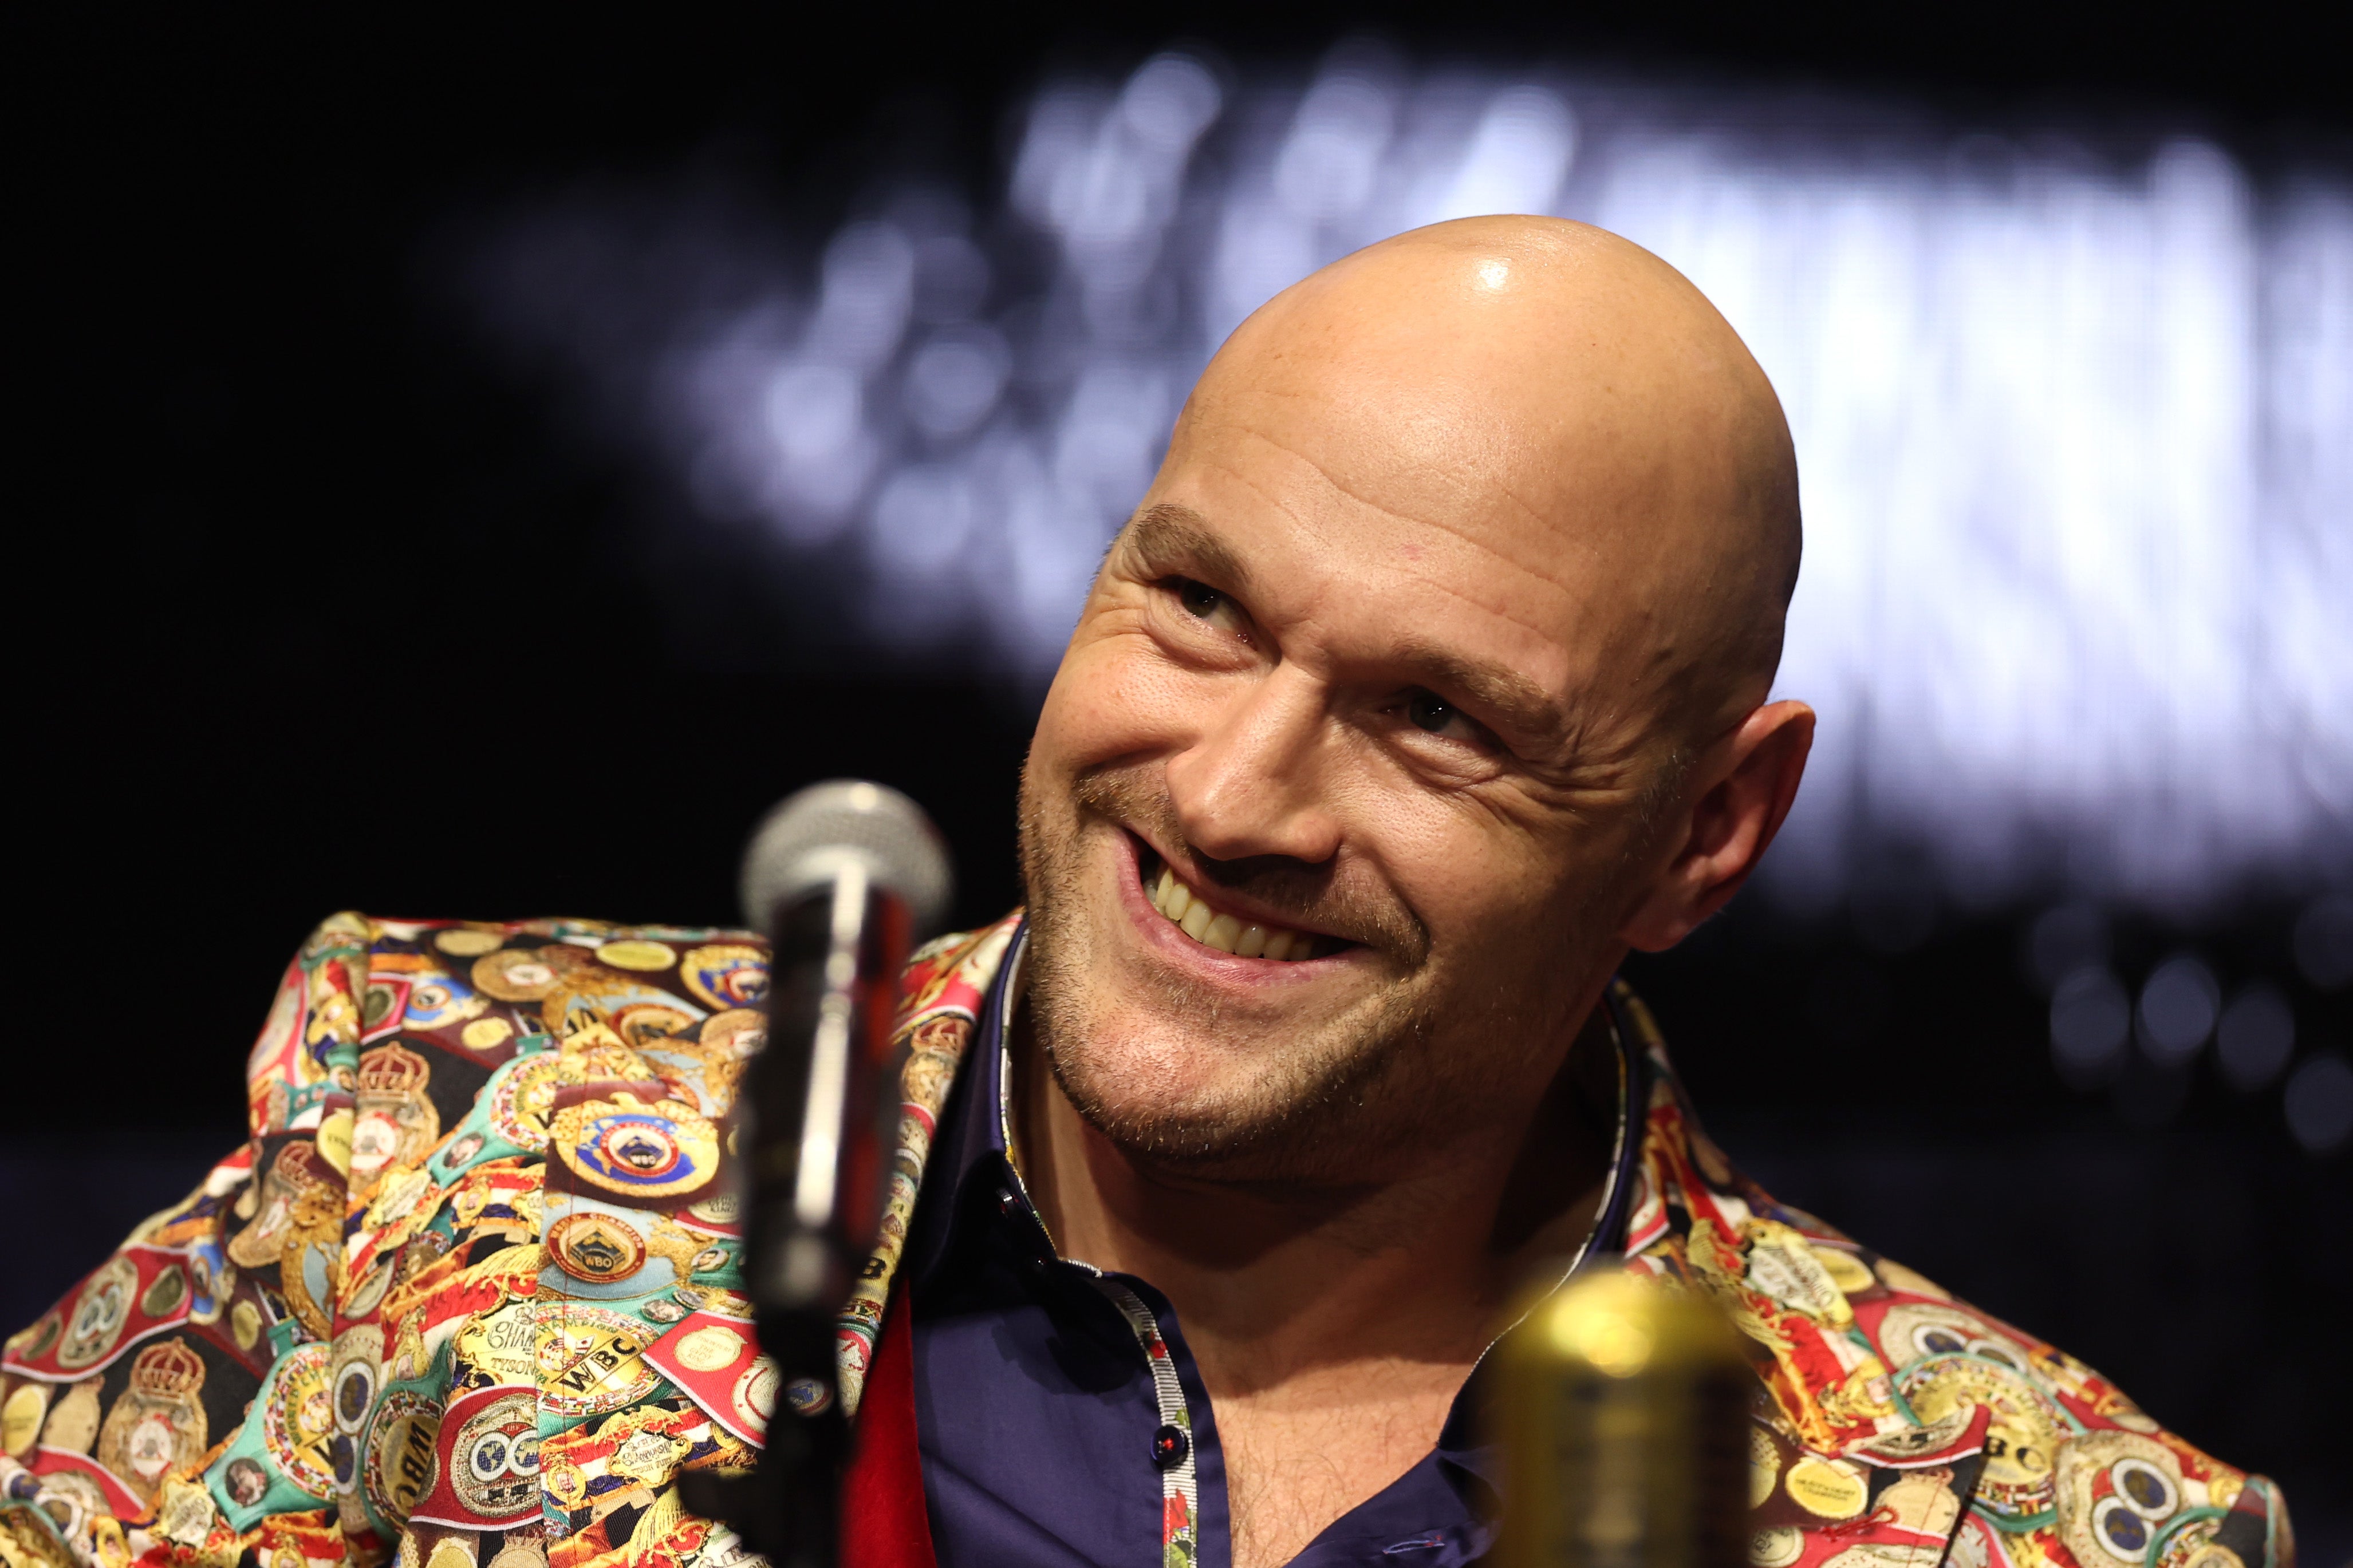 Tyson Fury will try to unify the heavyweight division against Usyk